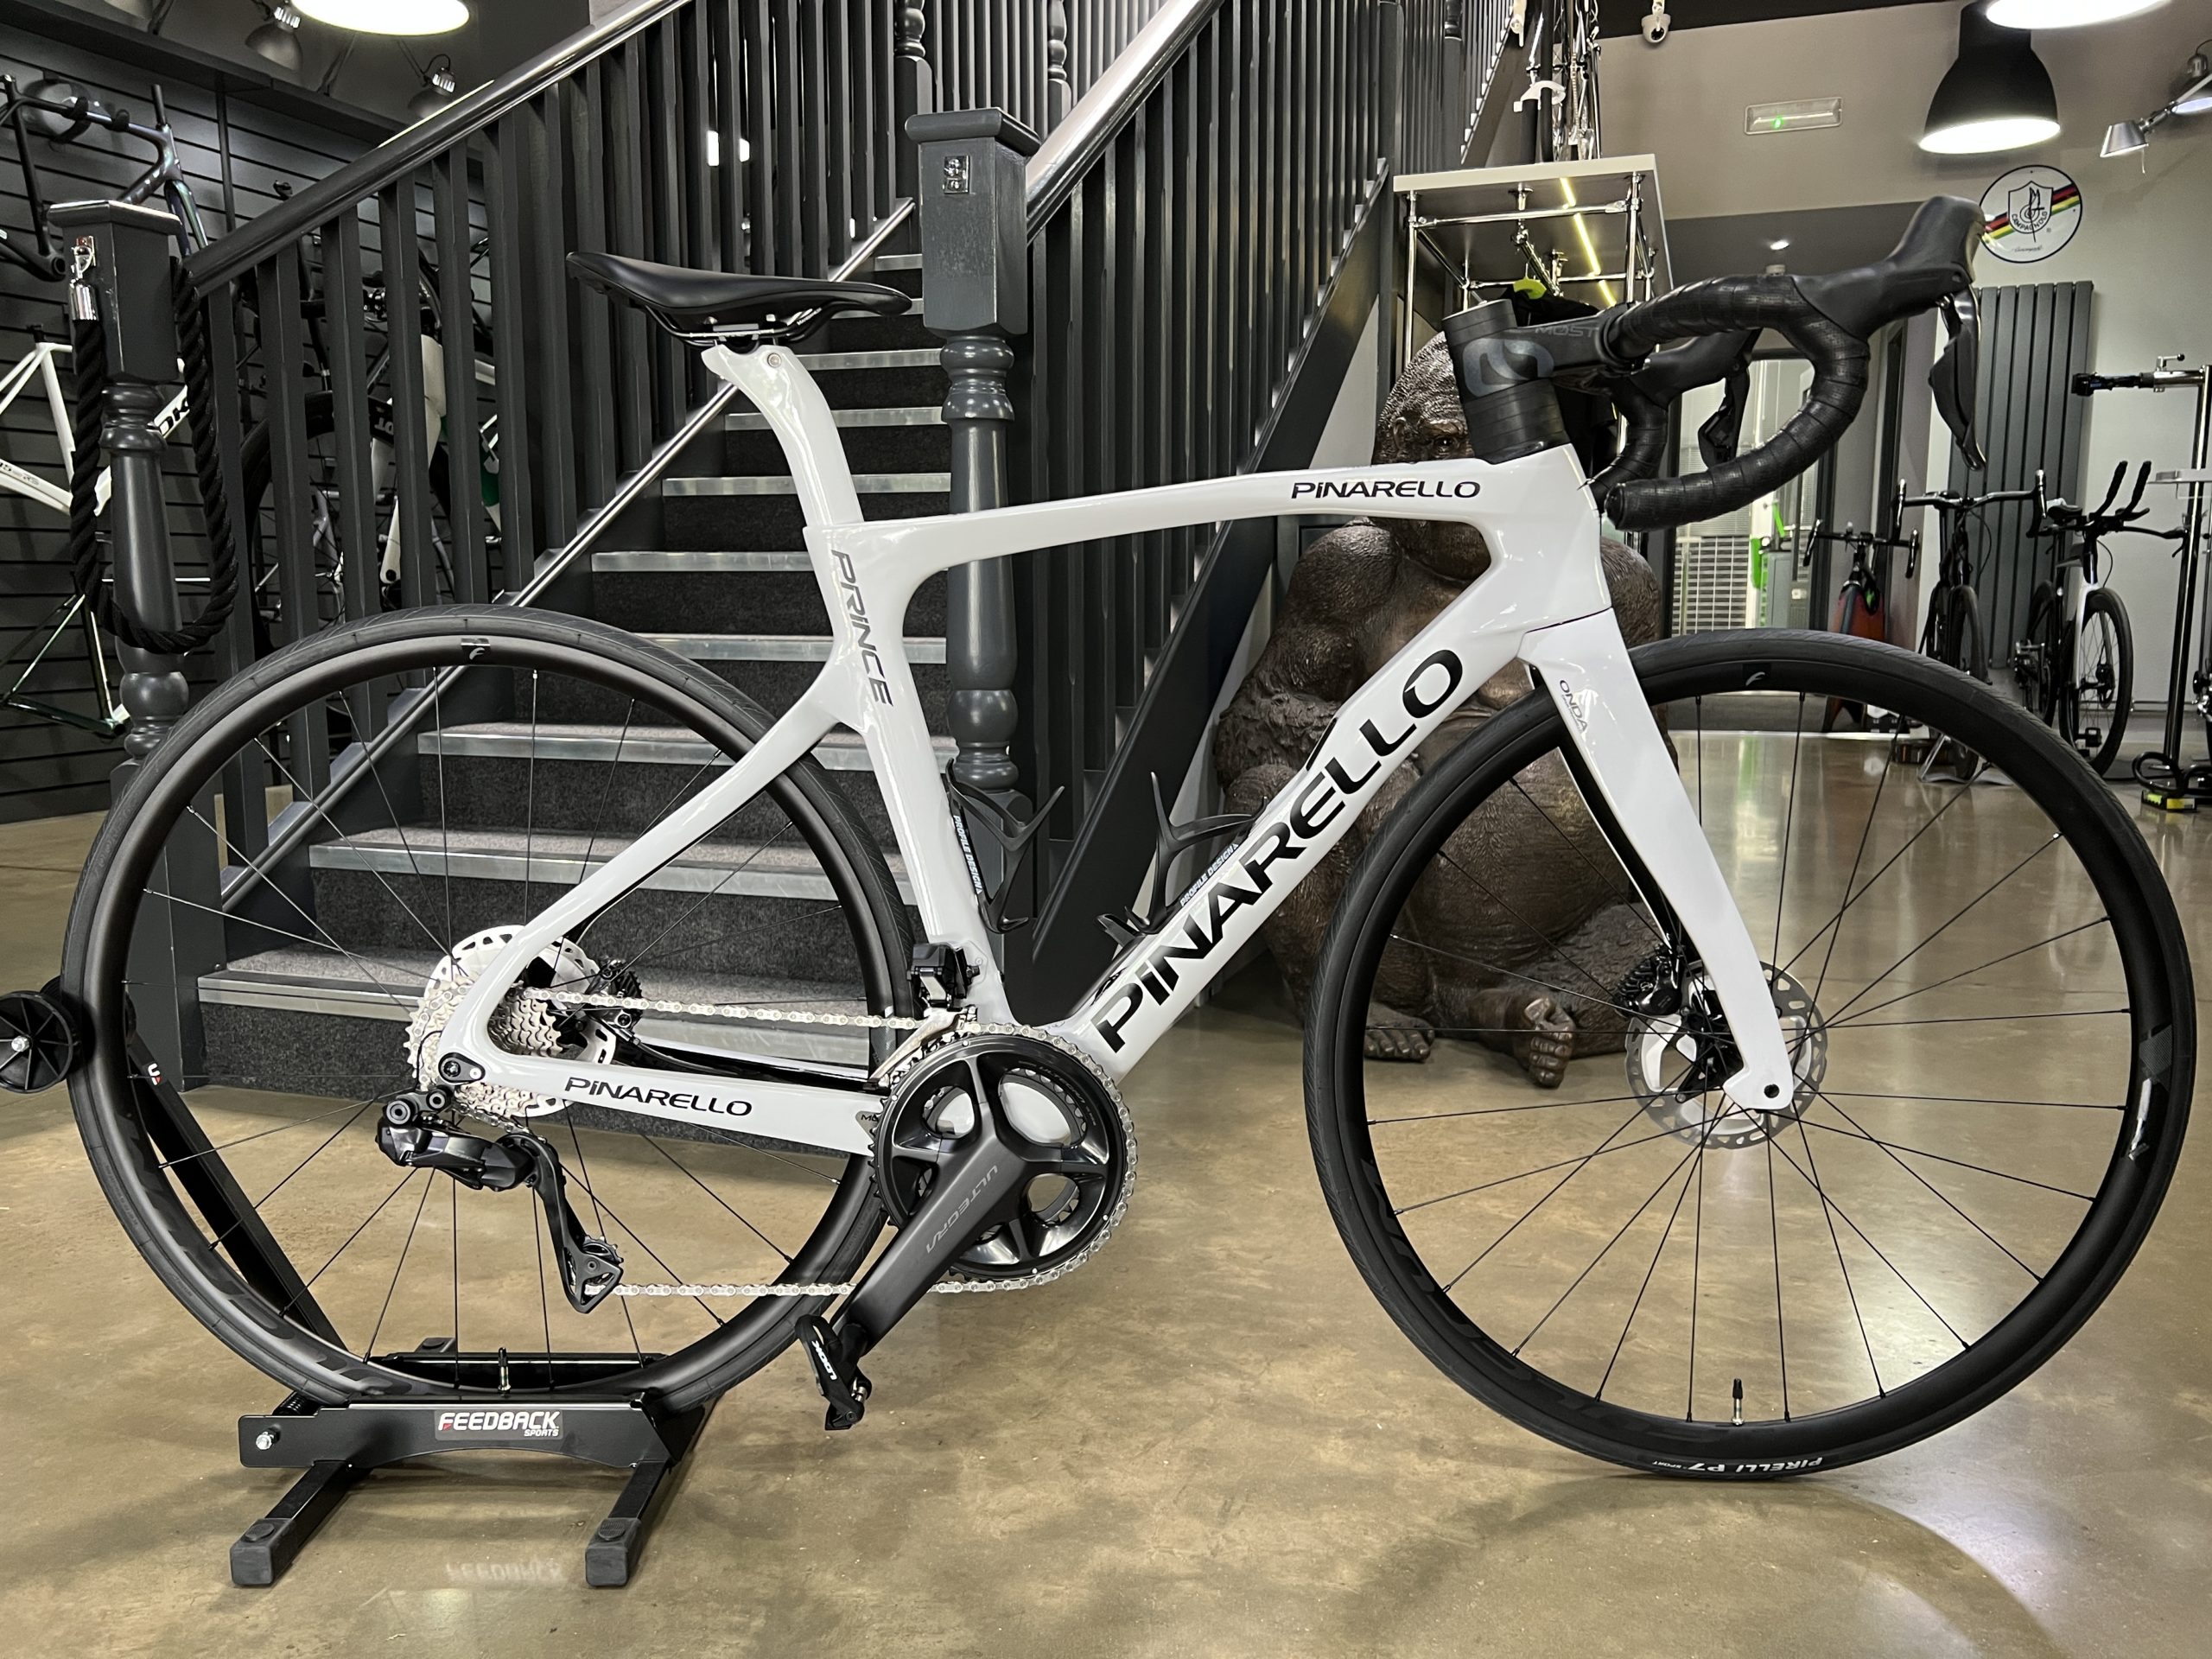 Private equity firm tied to LVMH acquires Pinarello